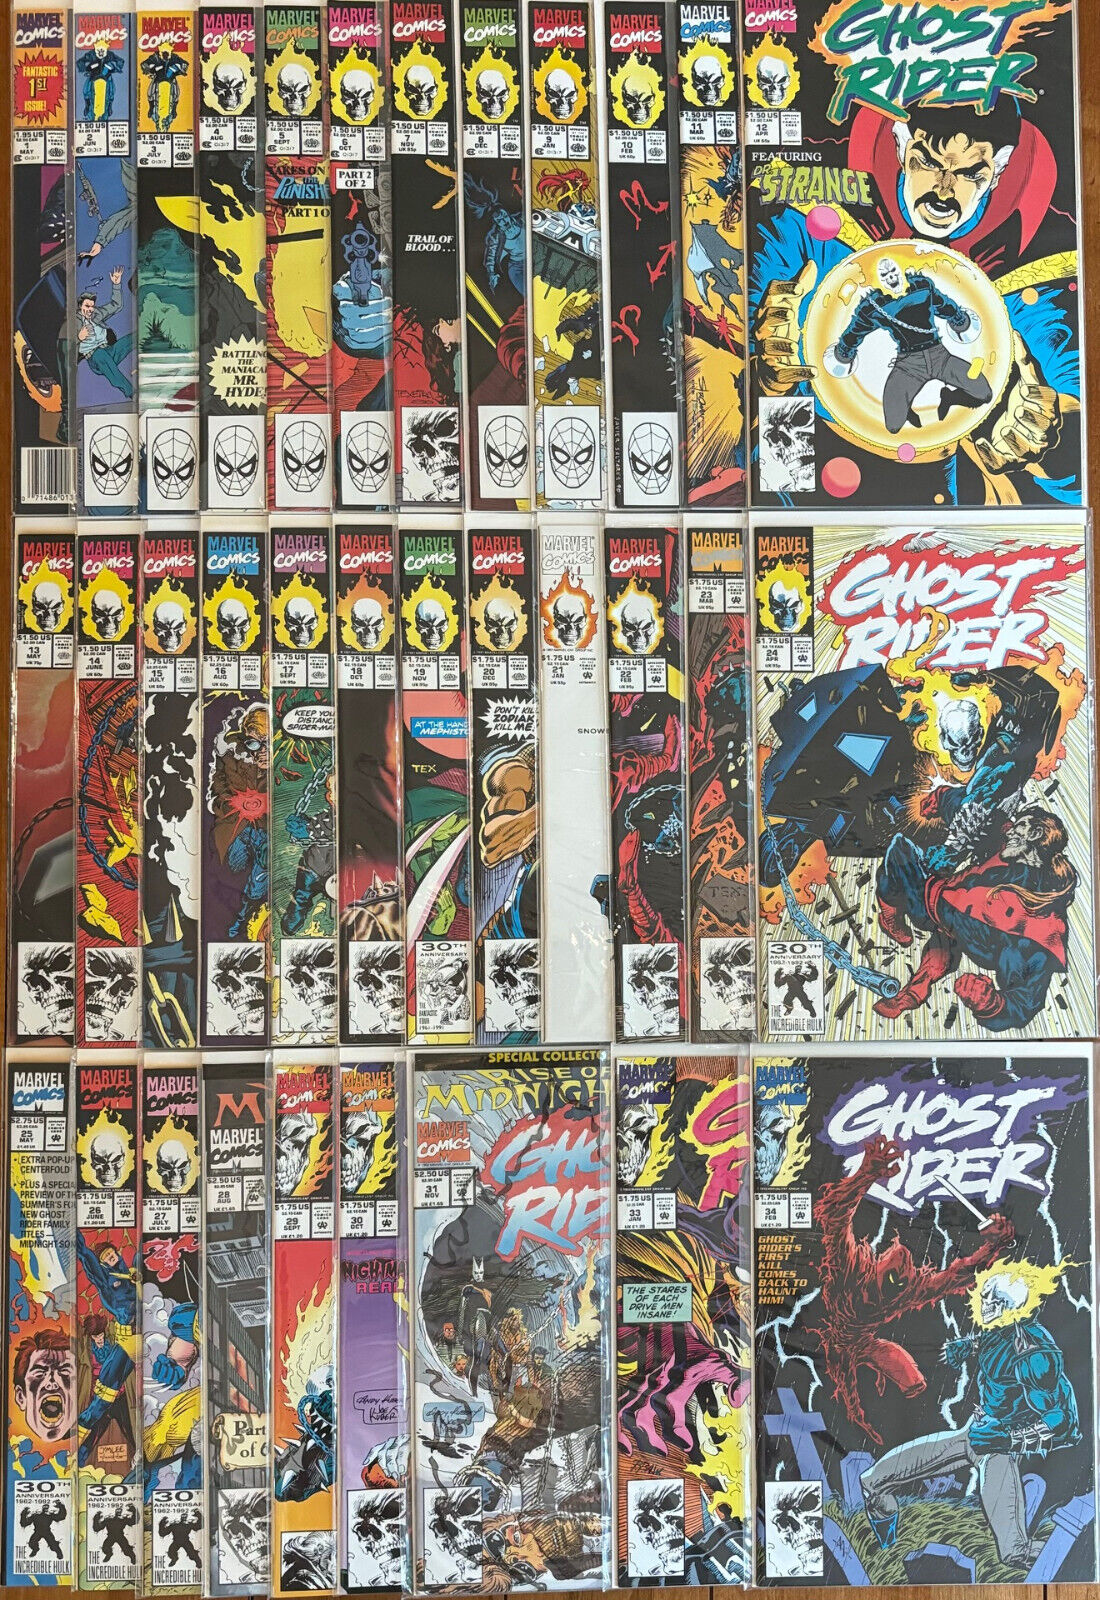 GHOST RIDER, MARVEL,  1990-93, Lot #1-31,33,34, 1 EACH, (33 TOTAL),  VERY GOOD